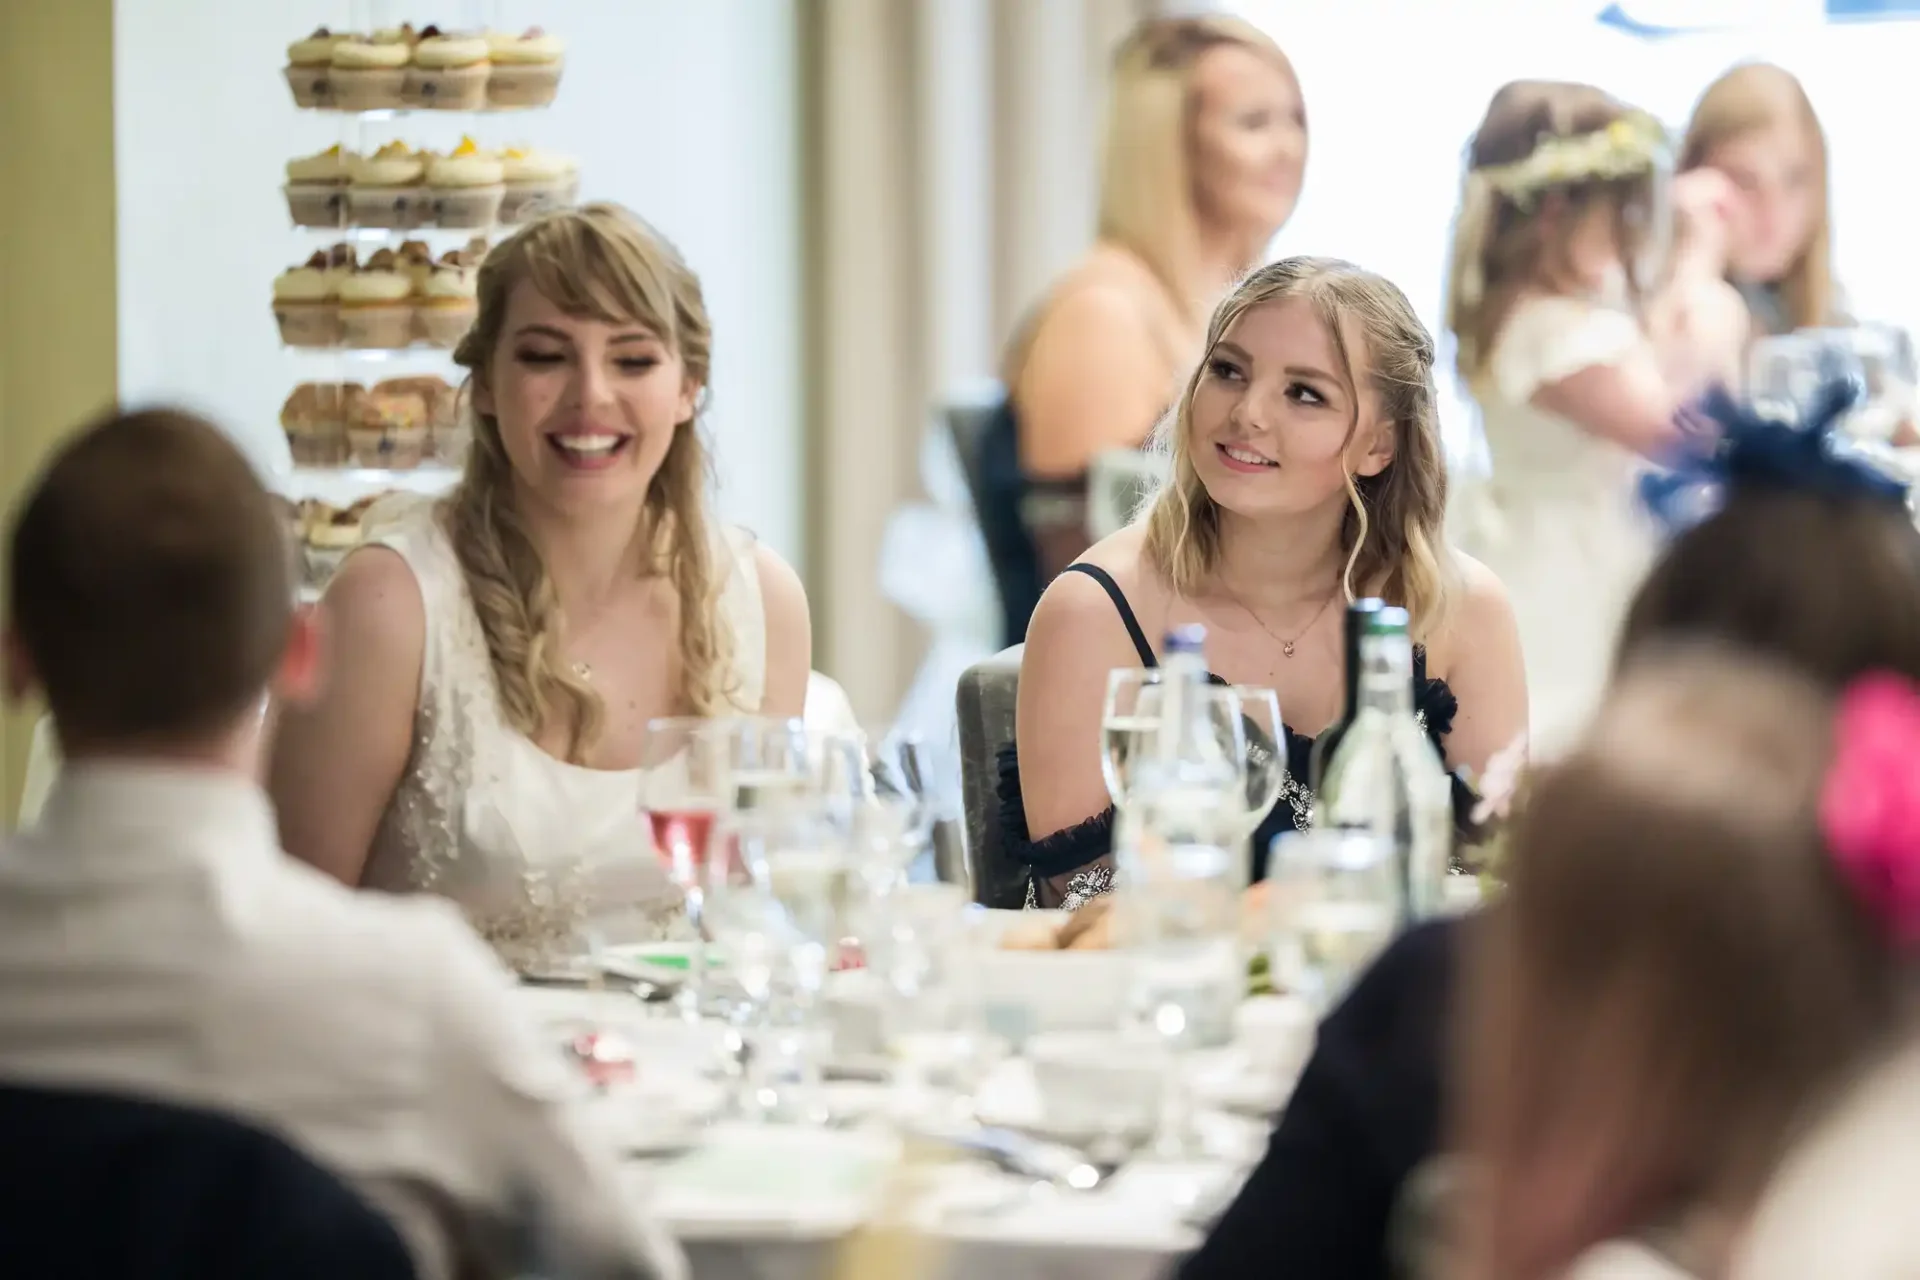 Two women smiling and interacting at a wedding reception table adorned with desserts and drinks.